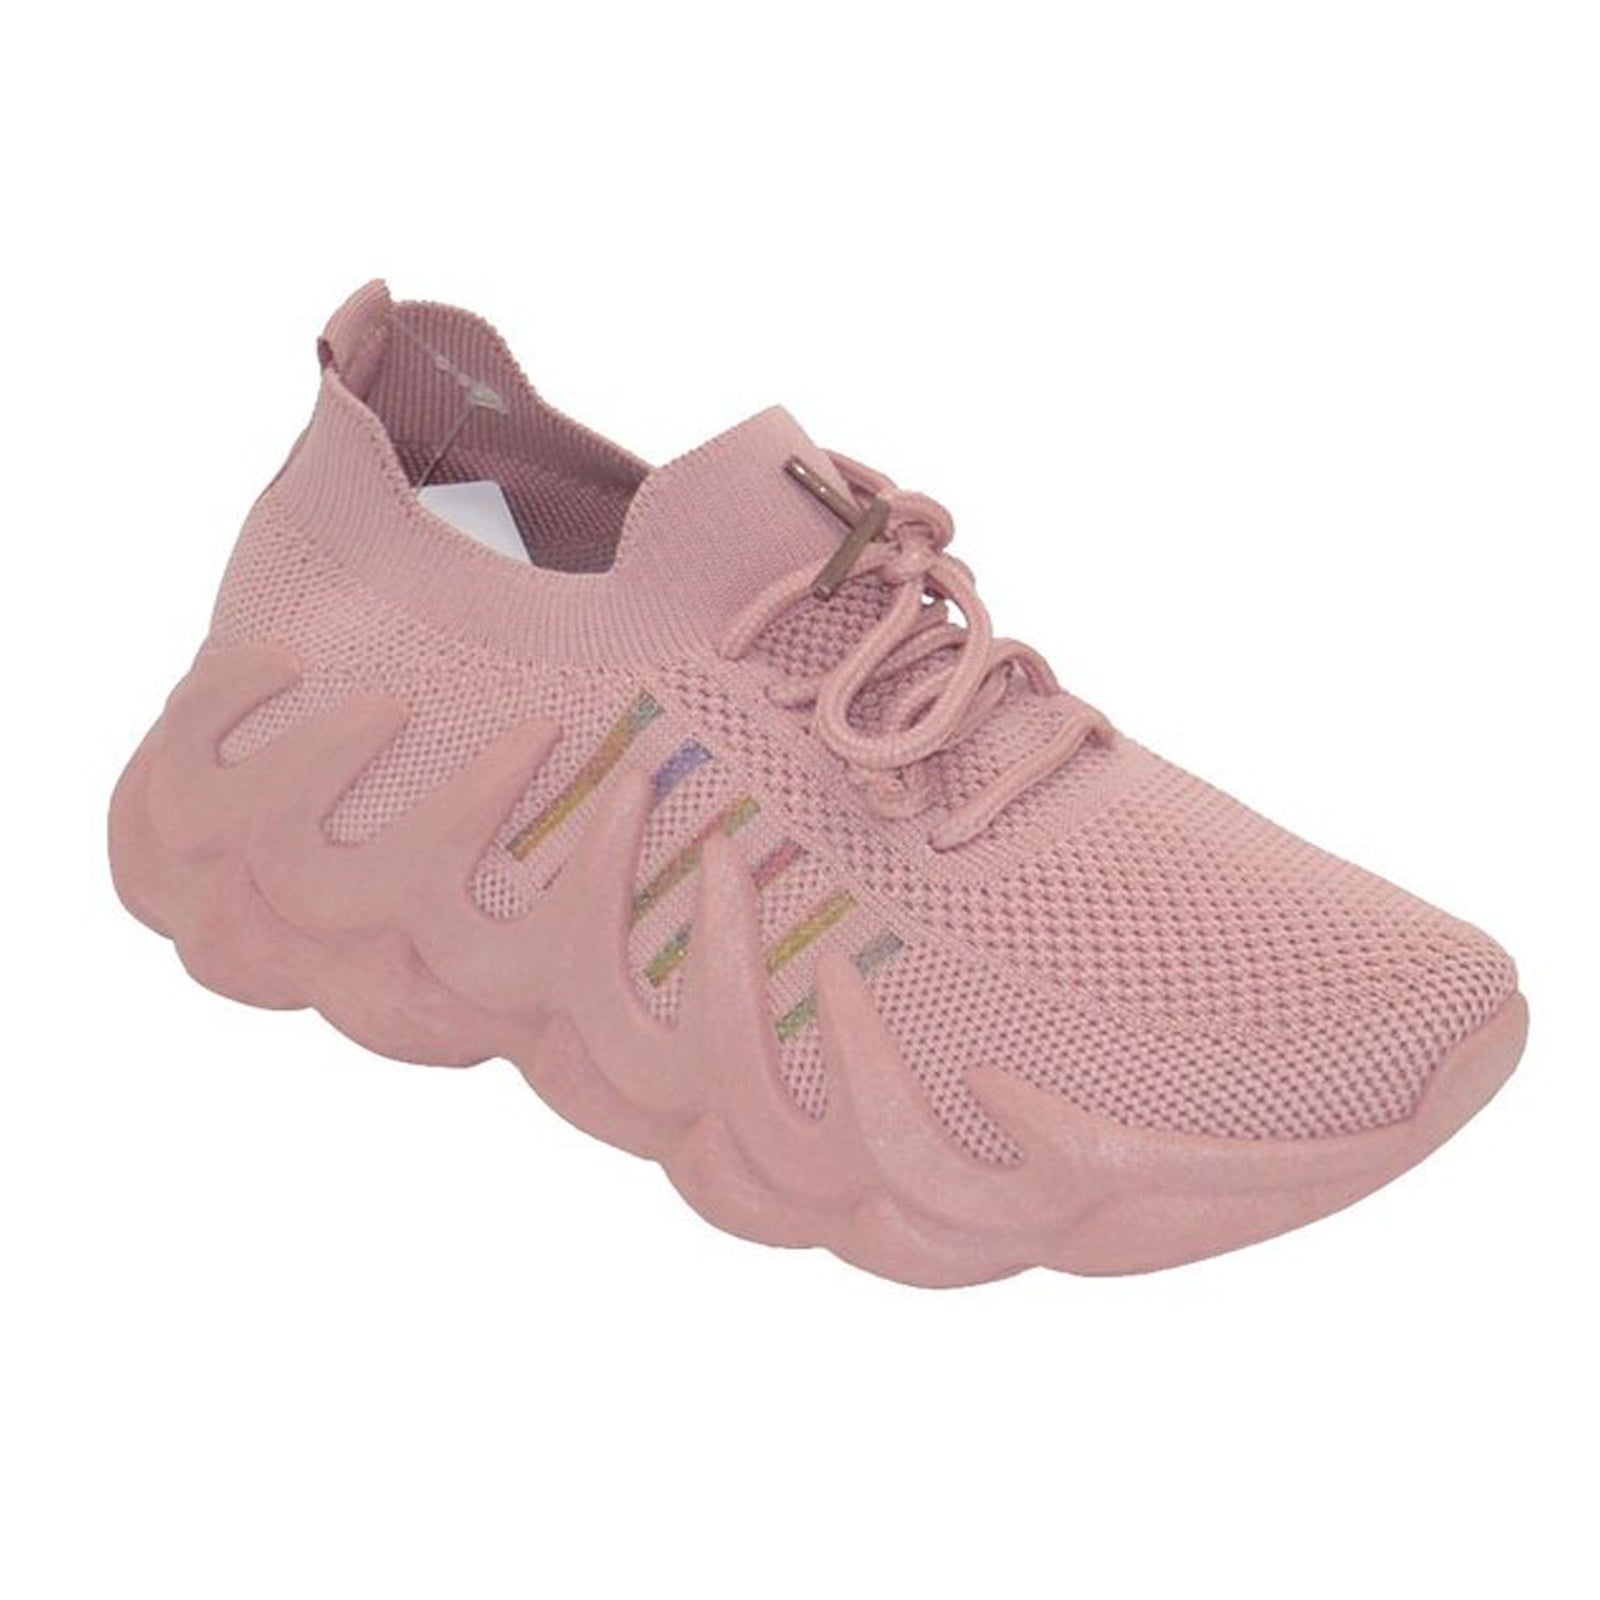 Wholesale Children's Shoes For Kids Sneakers Nicole NGAk